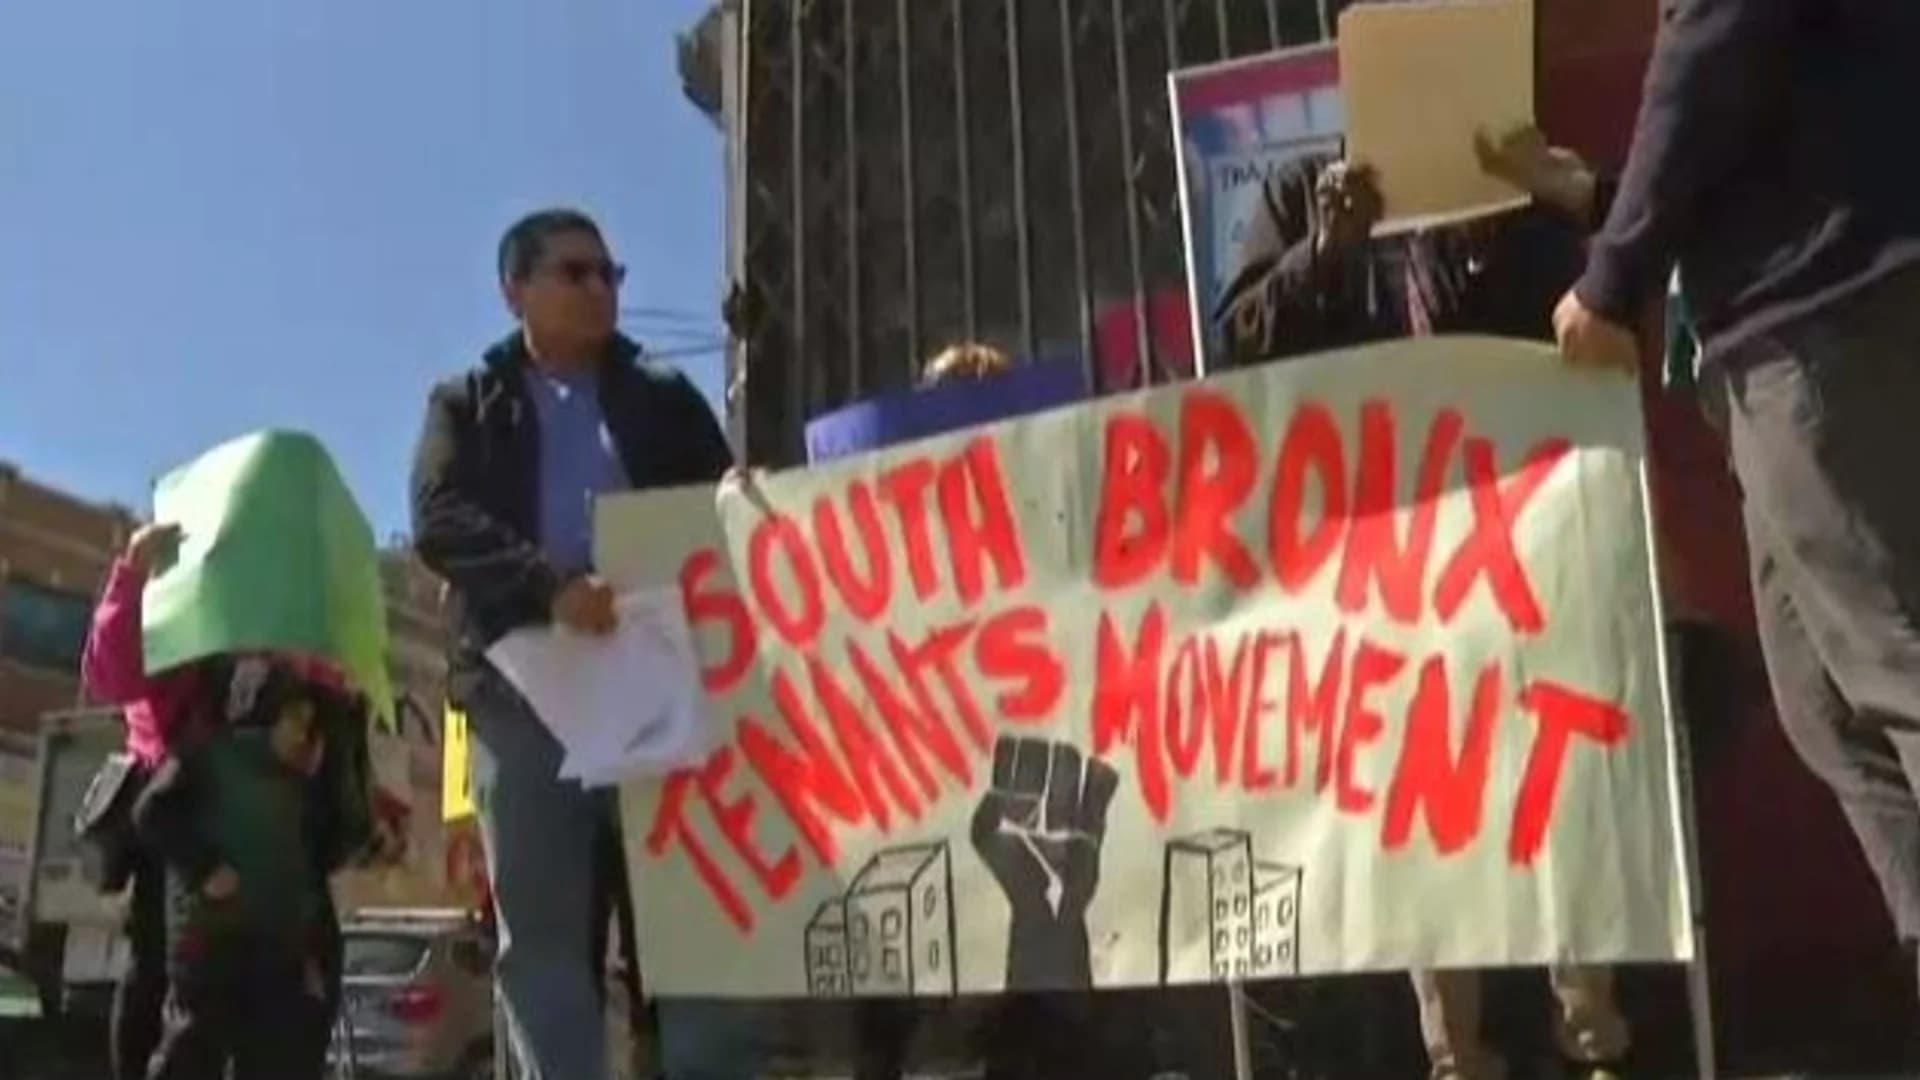 Tenants rally against landlord of Mott Haven apartments